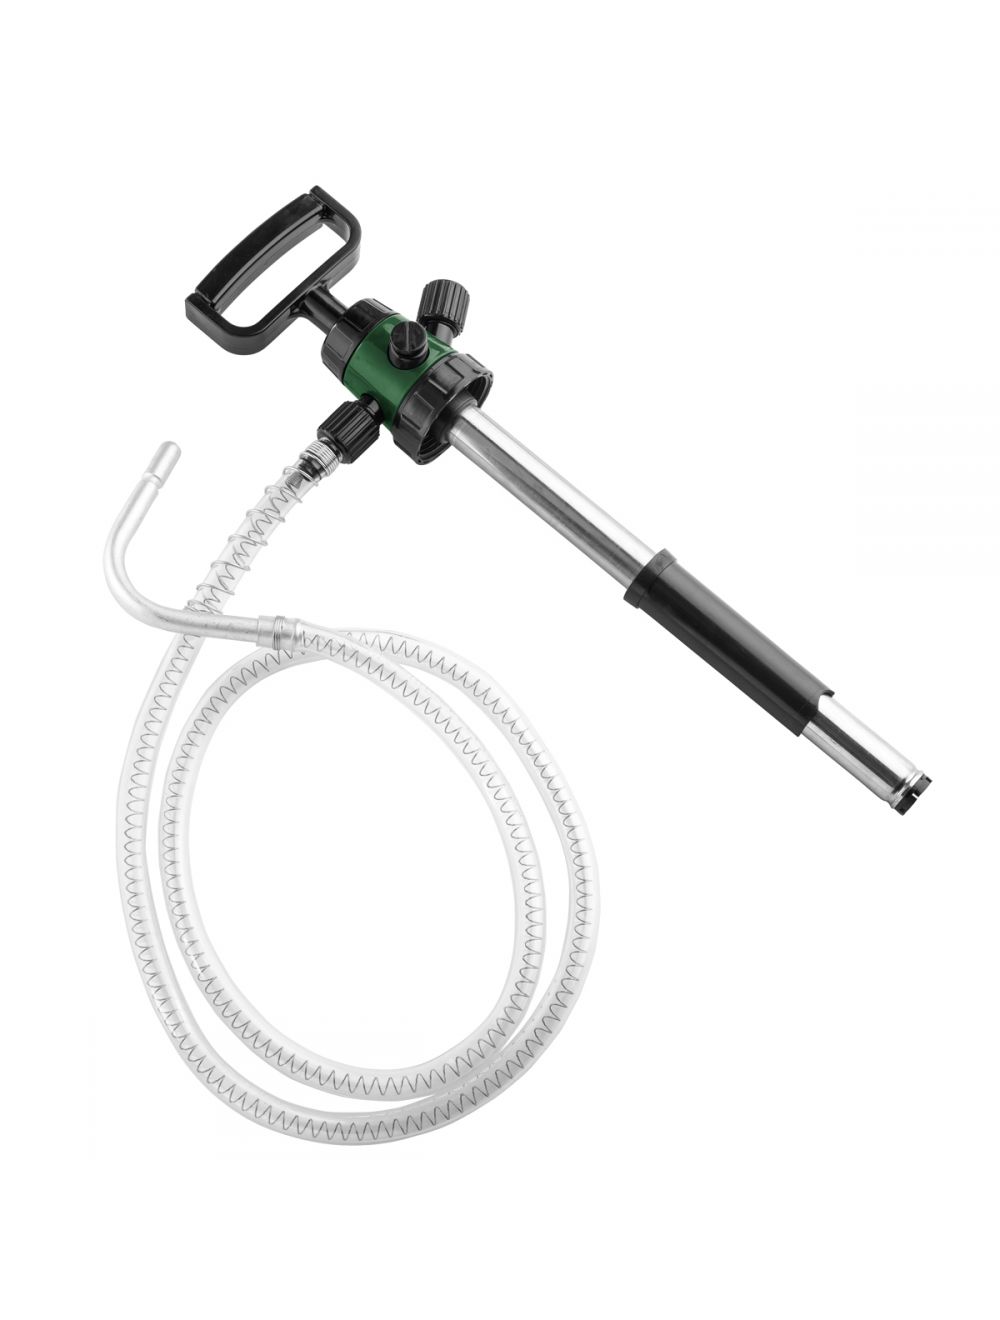 Water-proof Efficient And Requisite manual hand oil pump 